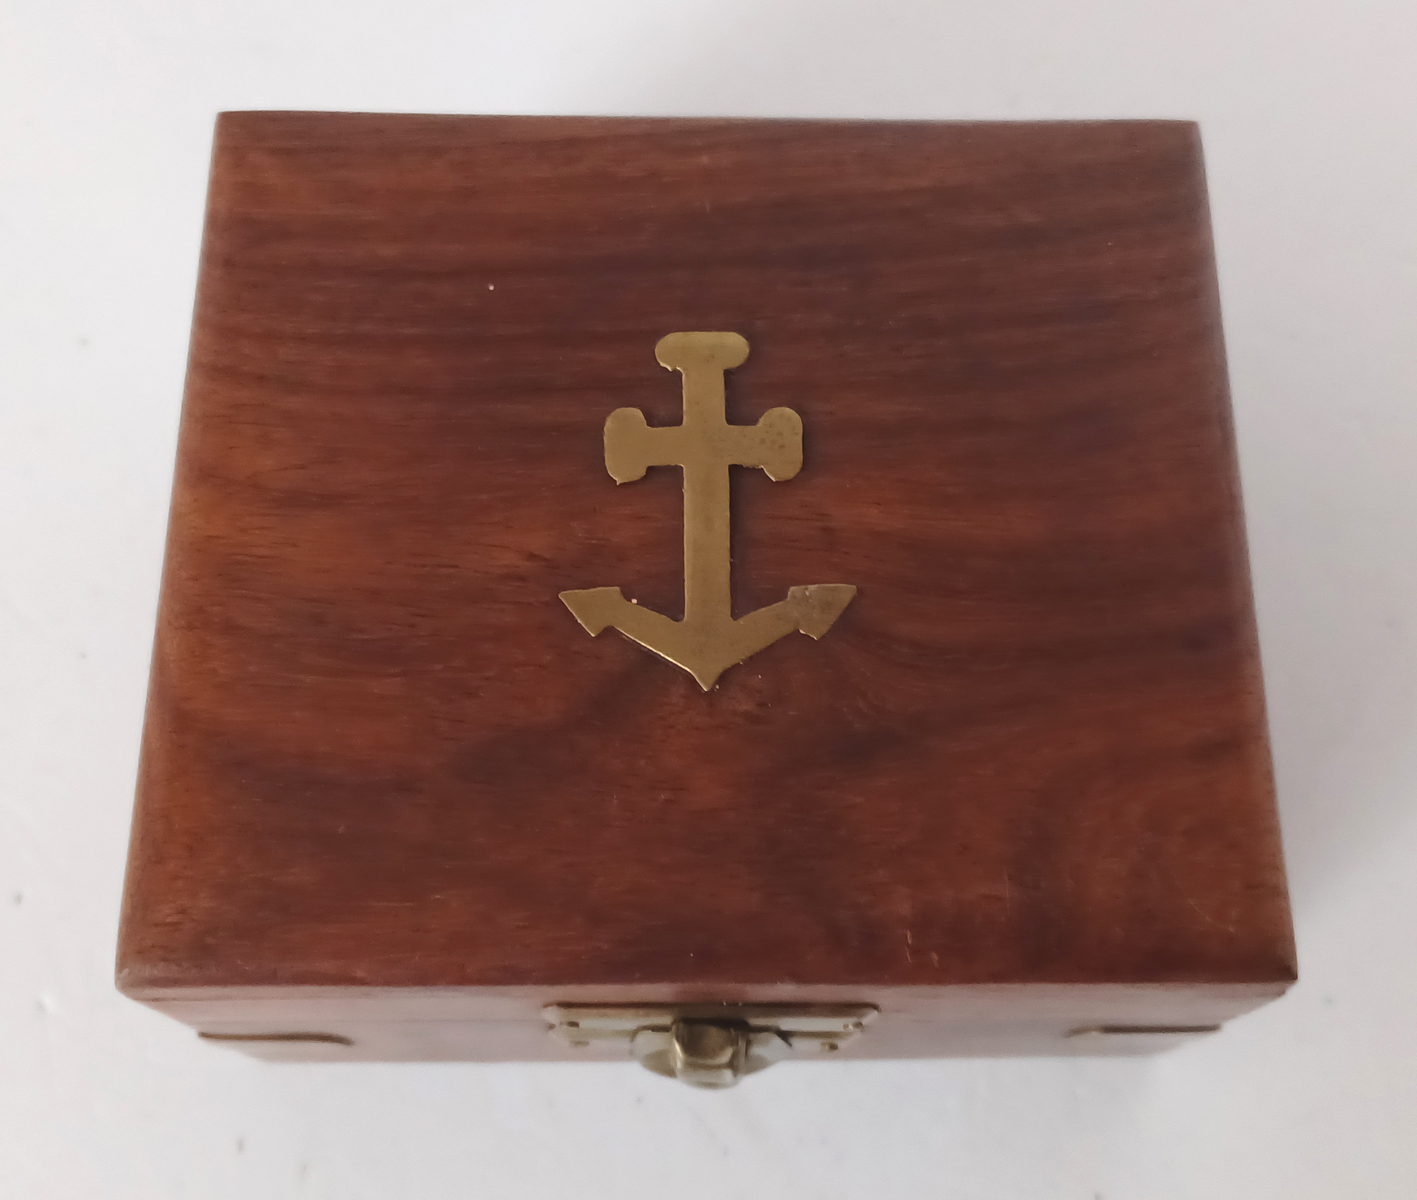 STANLEY LONDON NAUTICAL COMPASS, LEVELS STILL HAVE BUBBLES, WITH A WOODEN CASE - Image 3 of 3